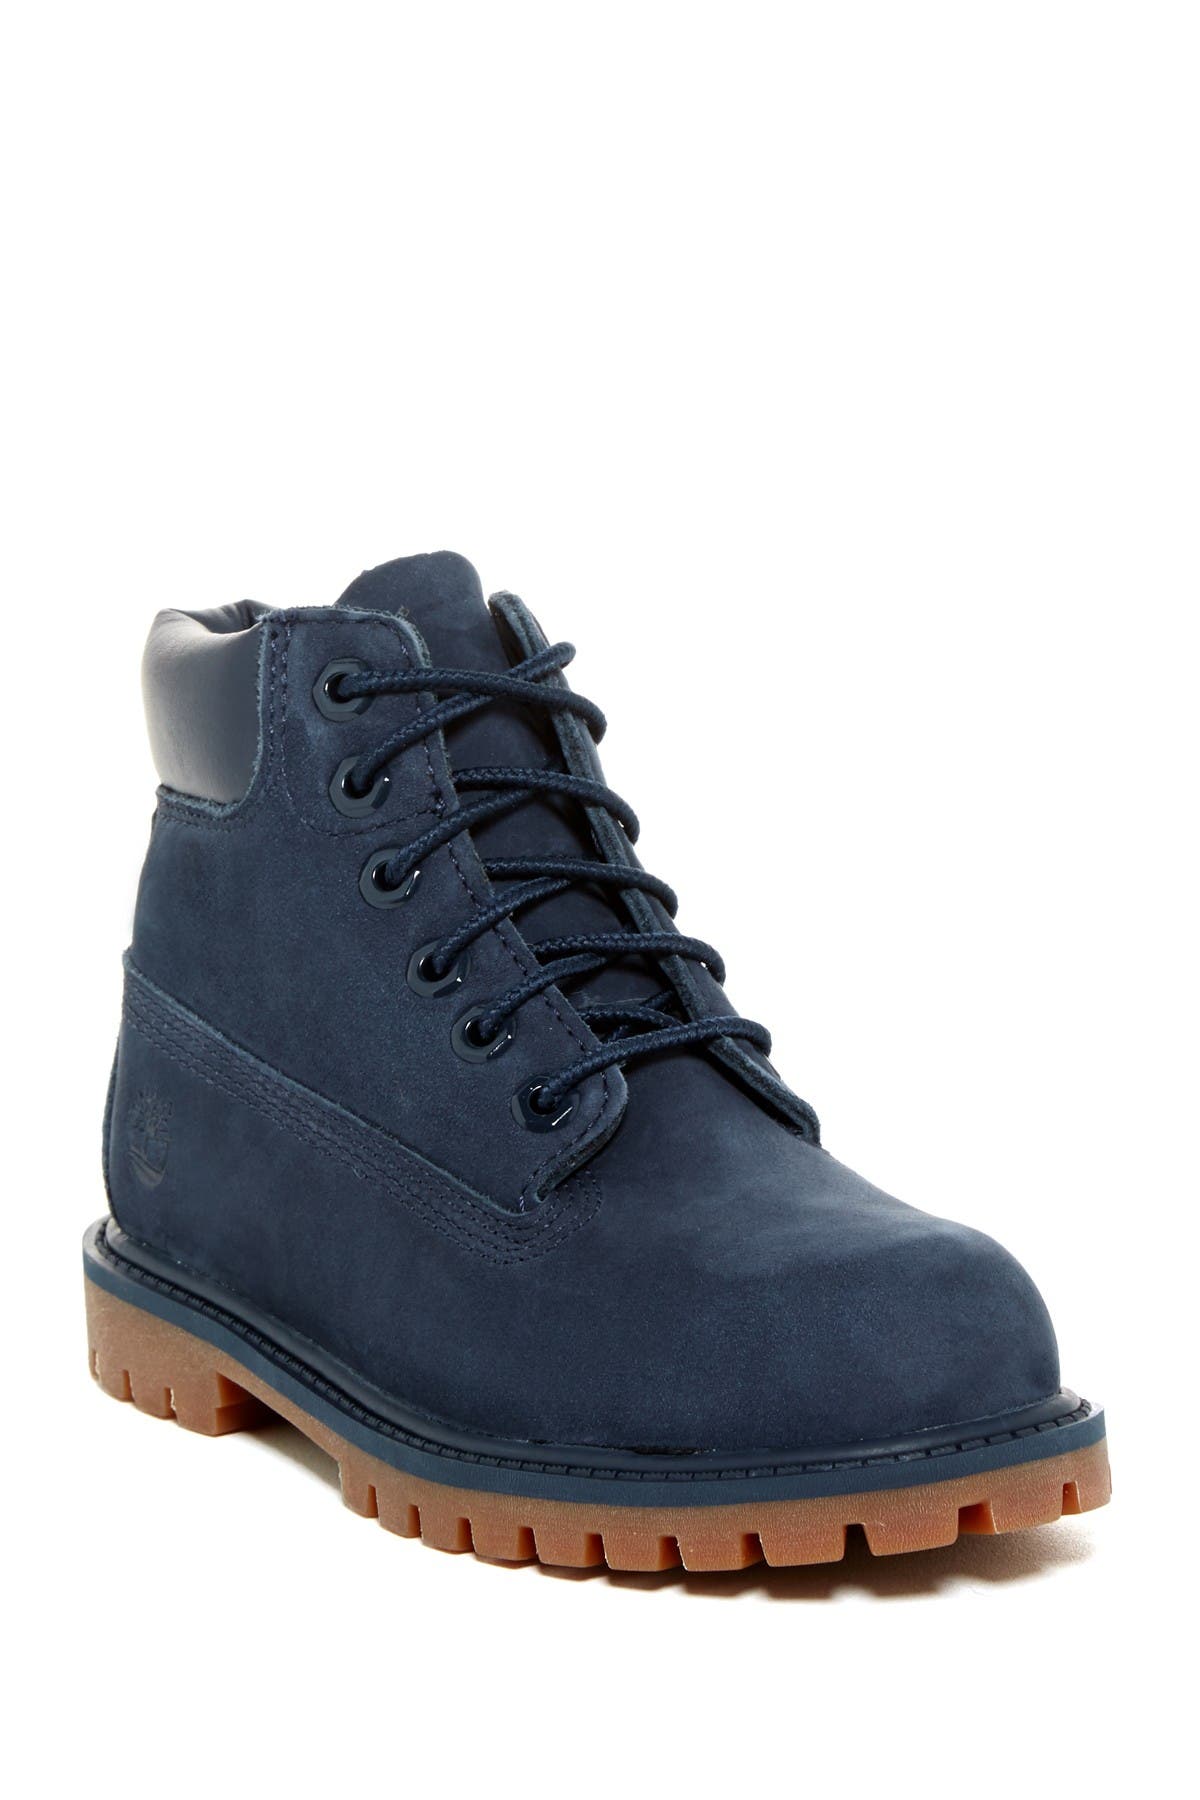 timberland wide width boots